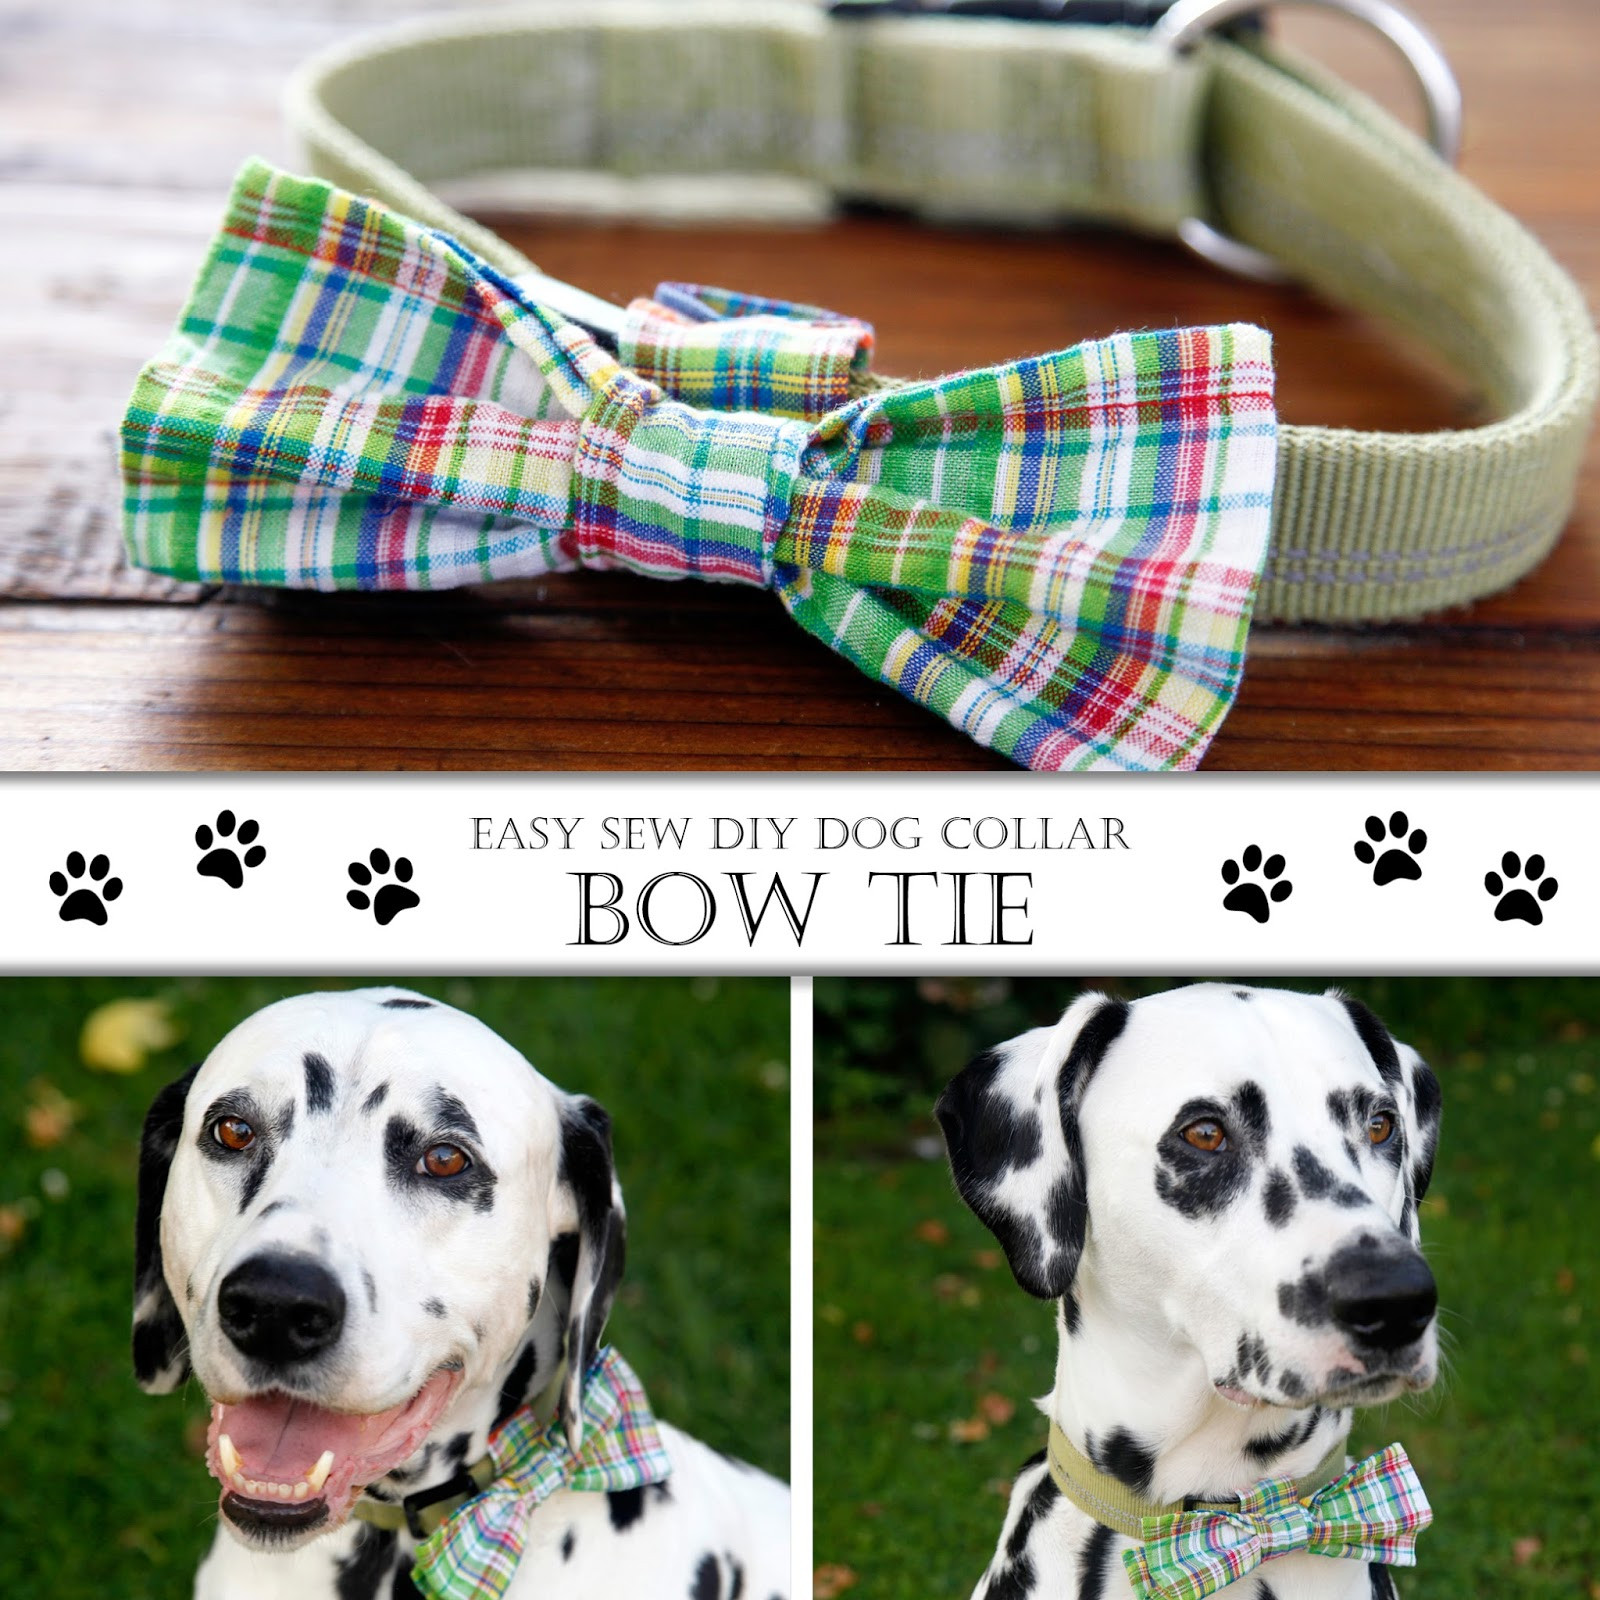 DIY Dog Bow Ties
 Dalmatian DIY DIY Easy Sew Over the Collar Bow Tie for Dogs